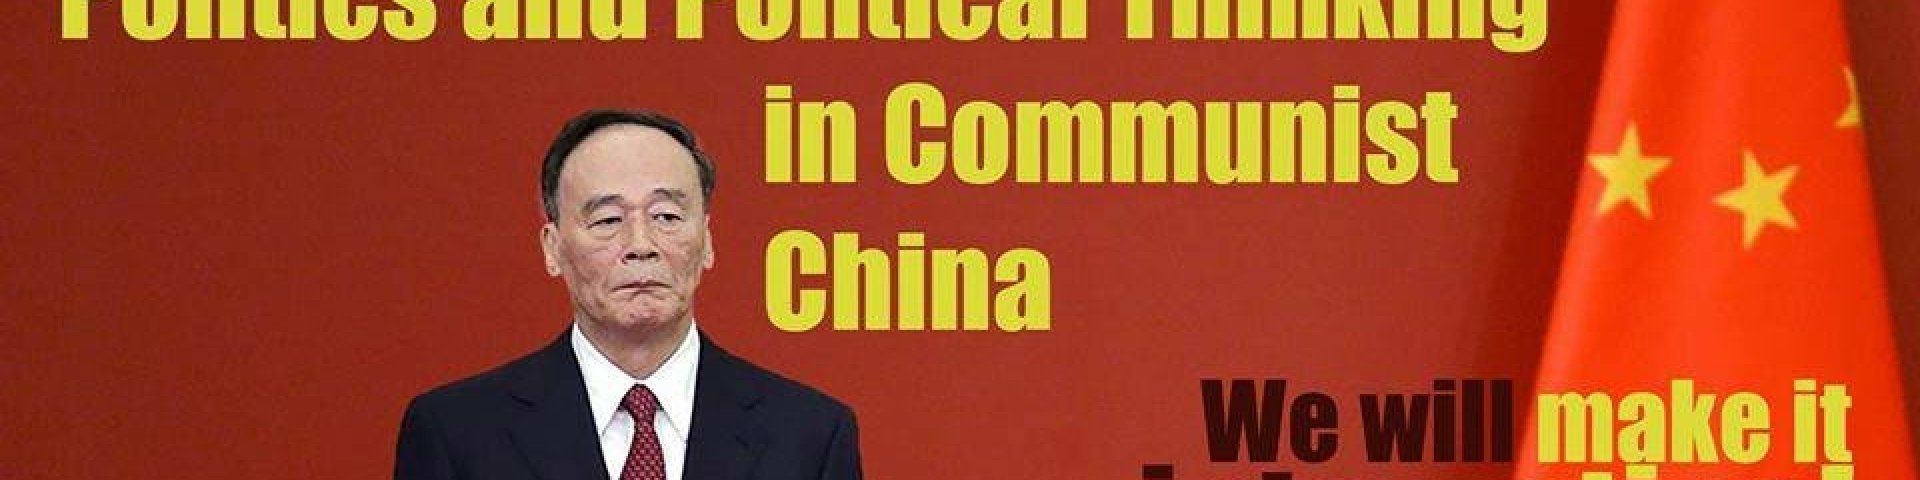 Short course: Politics and Political Thinking in Communist China